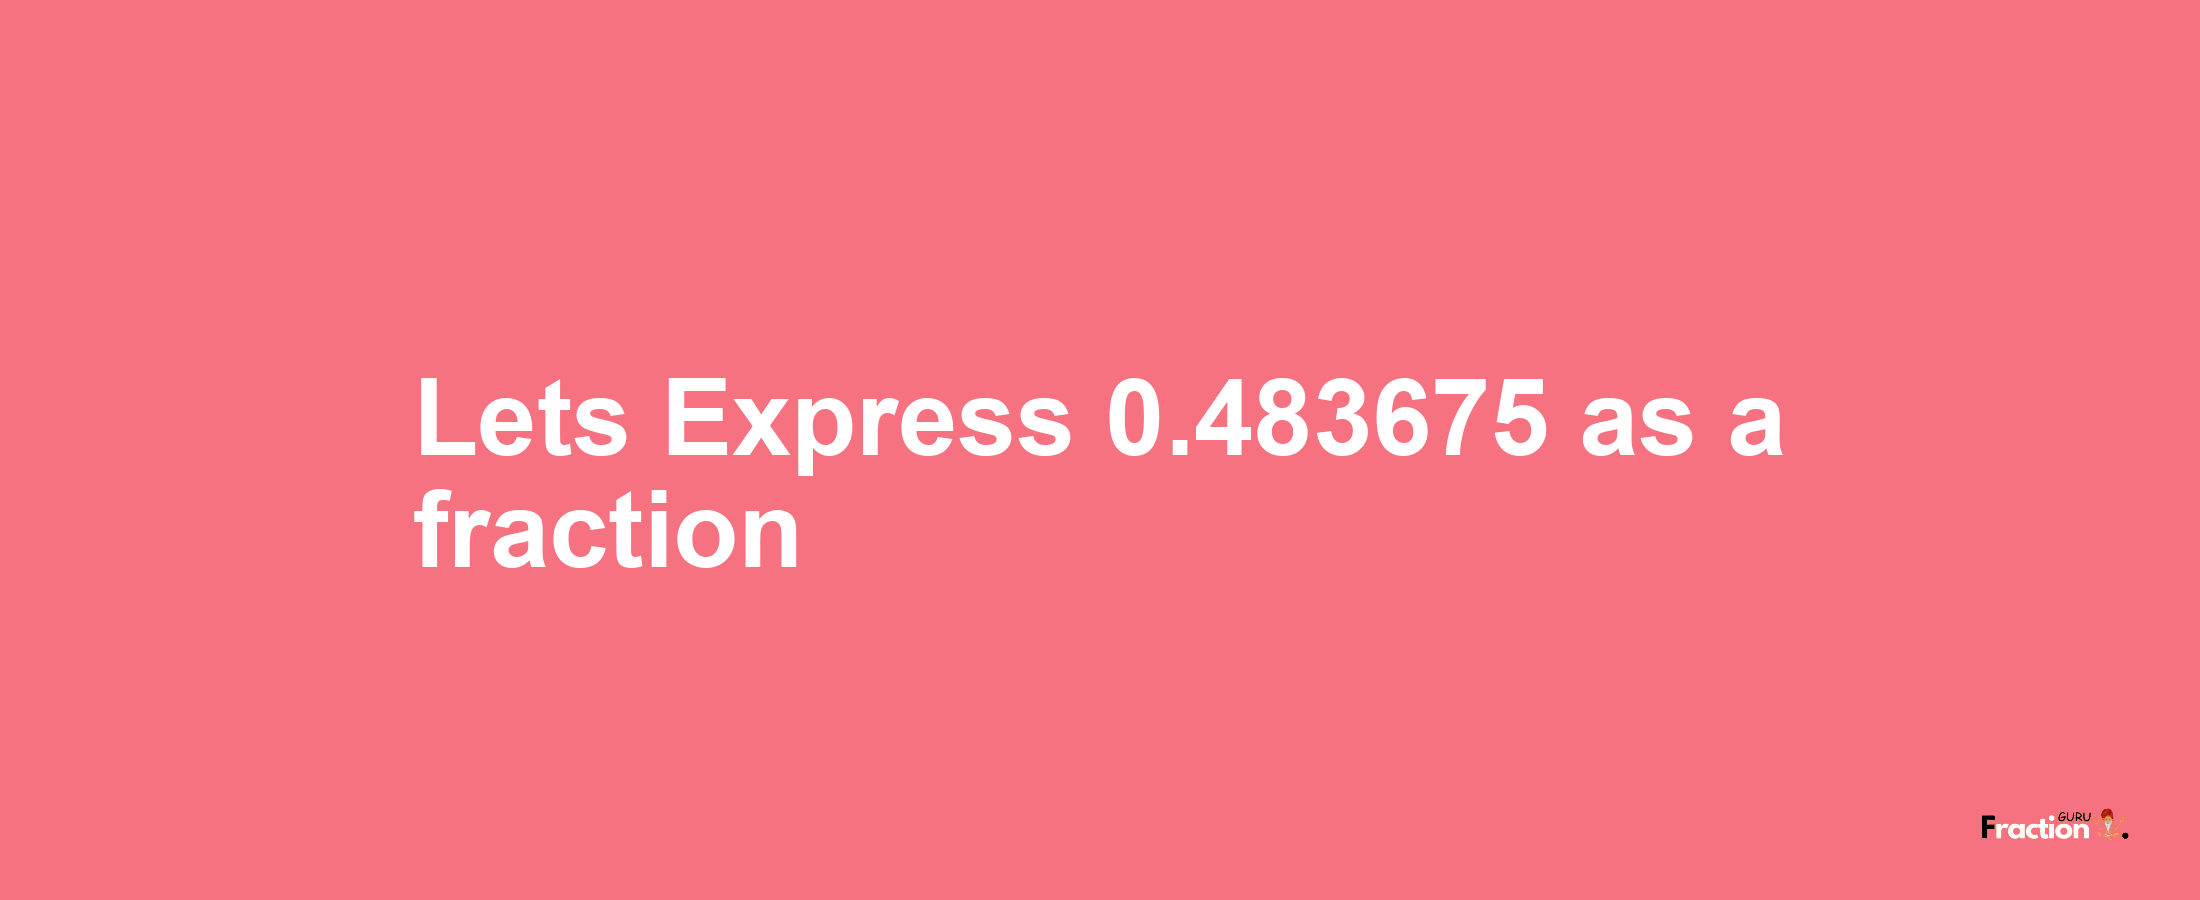 Lets Express 0.483675 as afraction